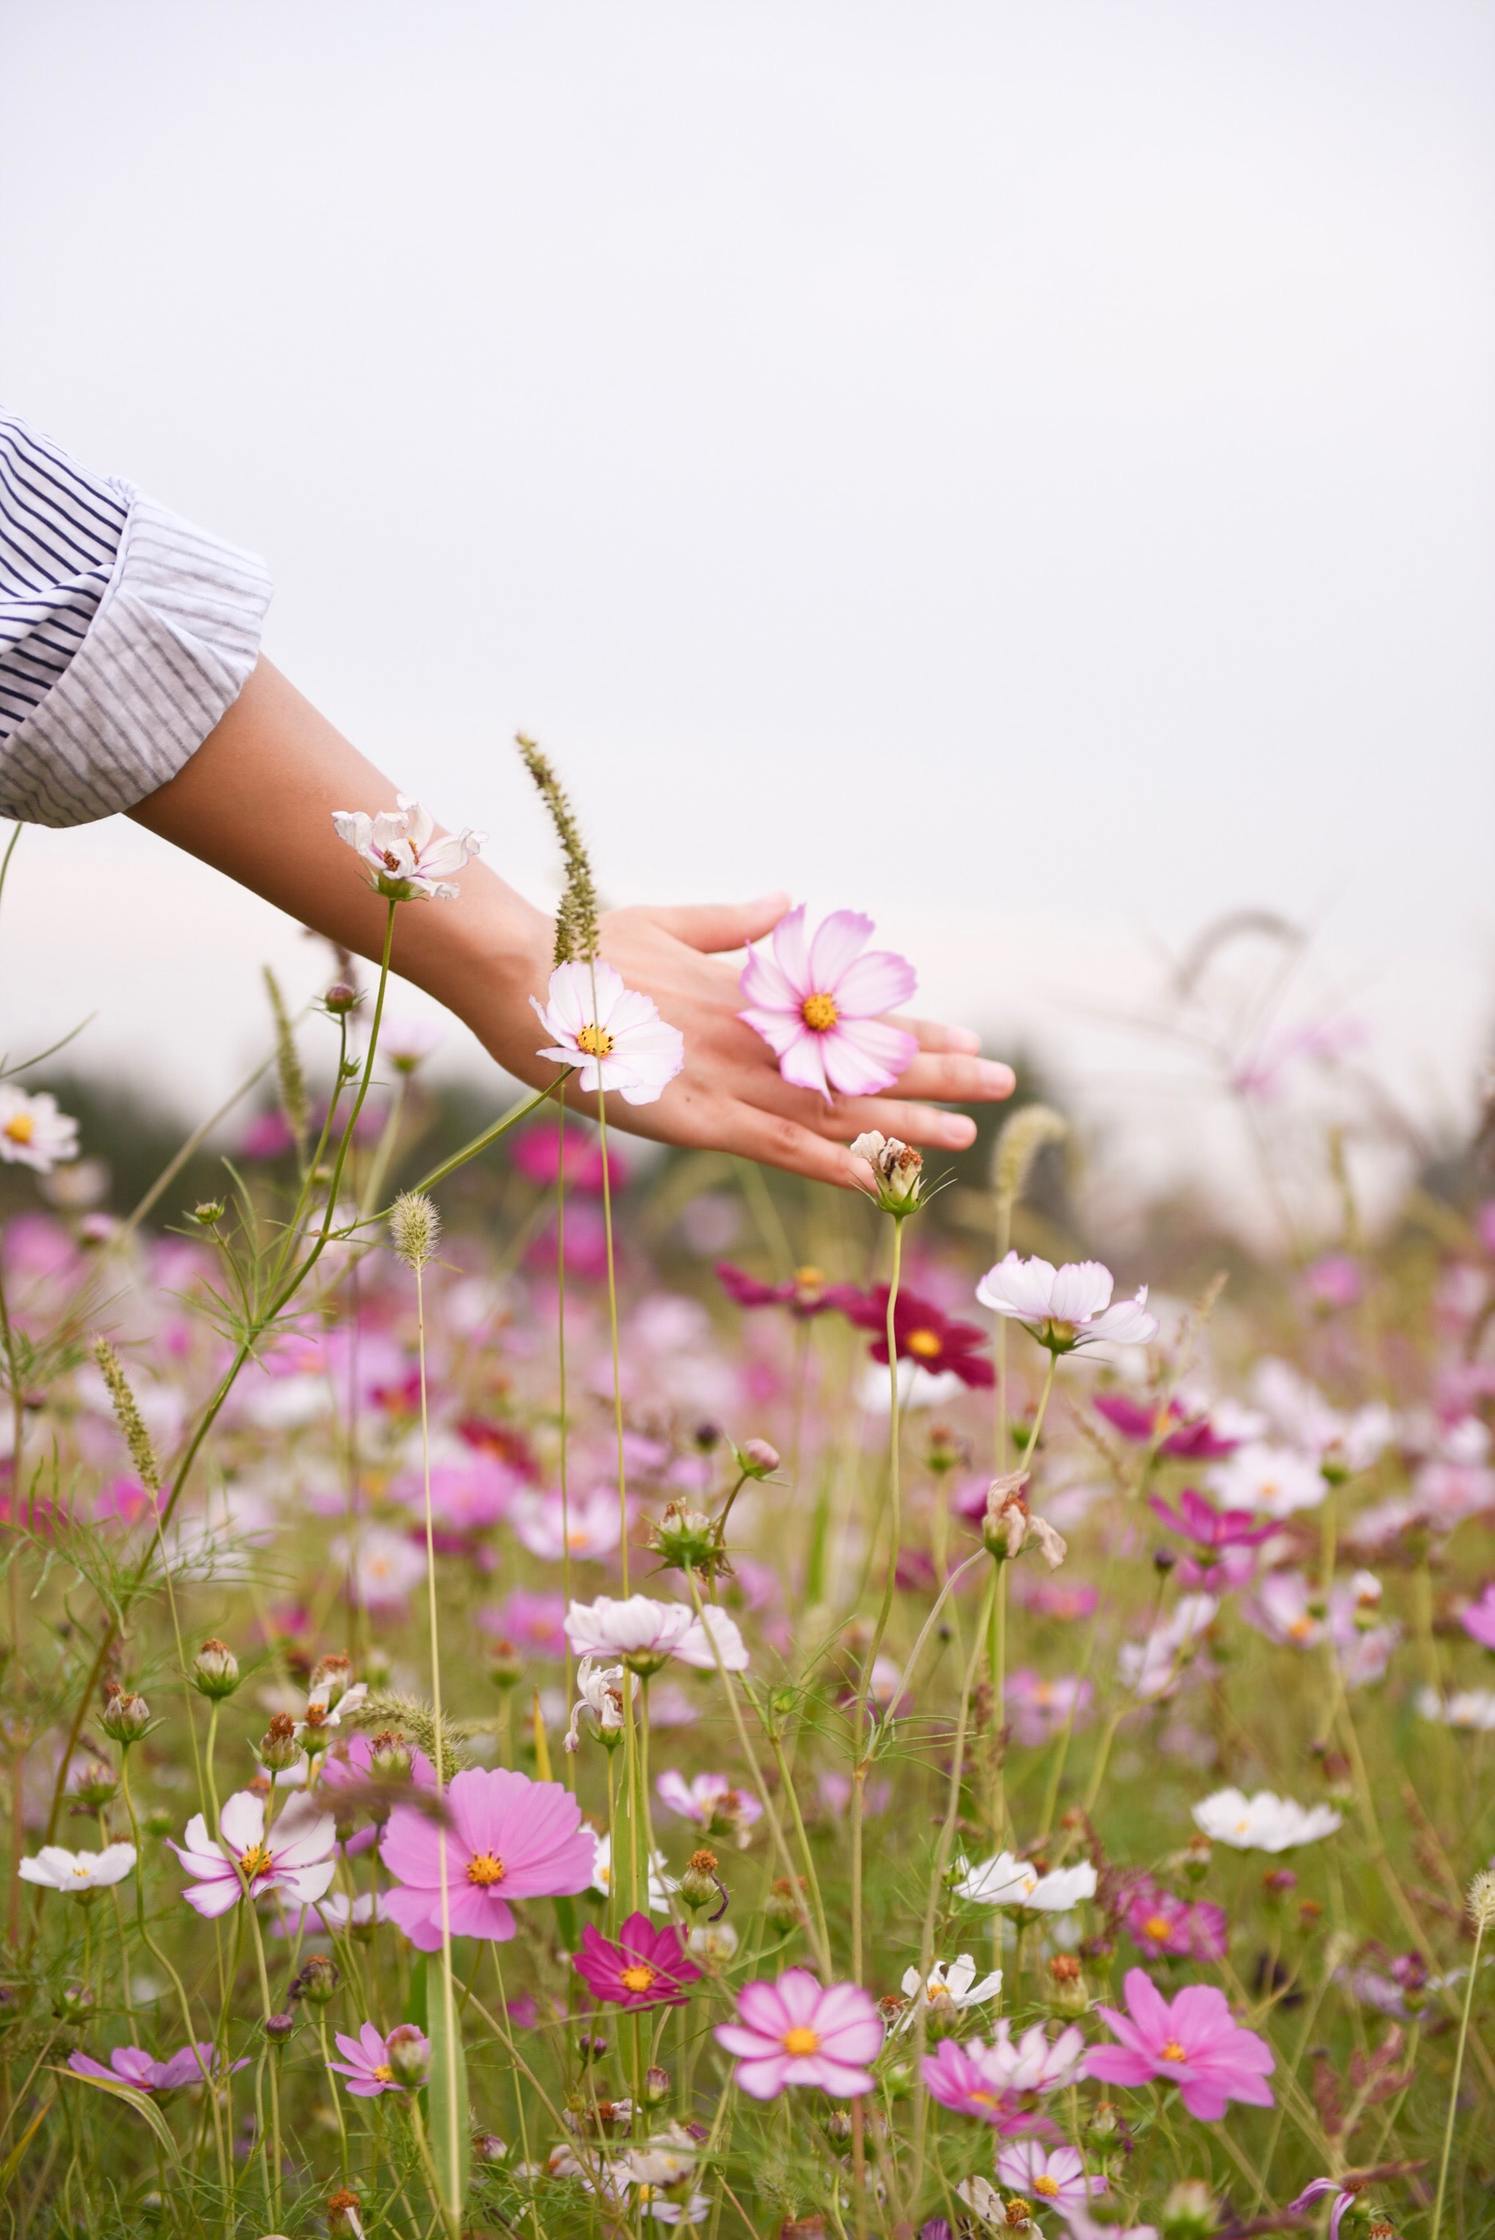 How to Use the Energy of Spring to Make Changes in Your Life